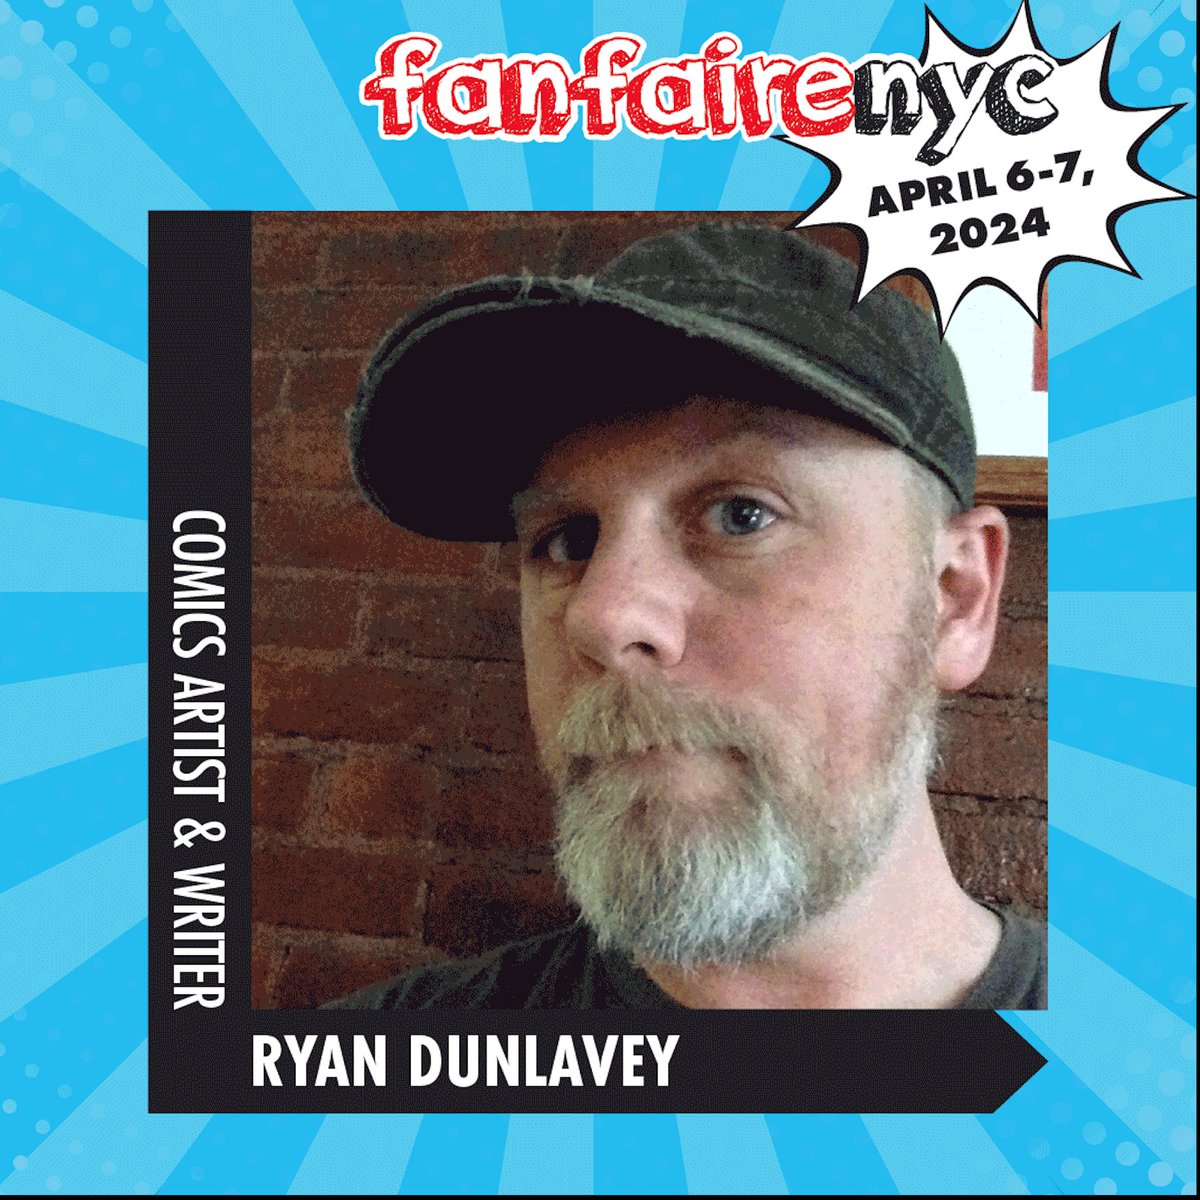 Fan Faire NYC is this weekend! Since it's at a high school, I'm only bringing 'lunch money' items for sale: prints, stickers, cheap/free comics and a stack of blank sketch covers for doodling. Use code ENTOURAGE24 for discounted tix: eventbrite.com/e/fanfairenyc-… See you there!!